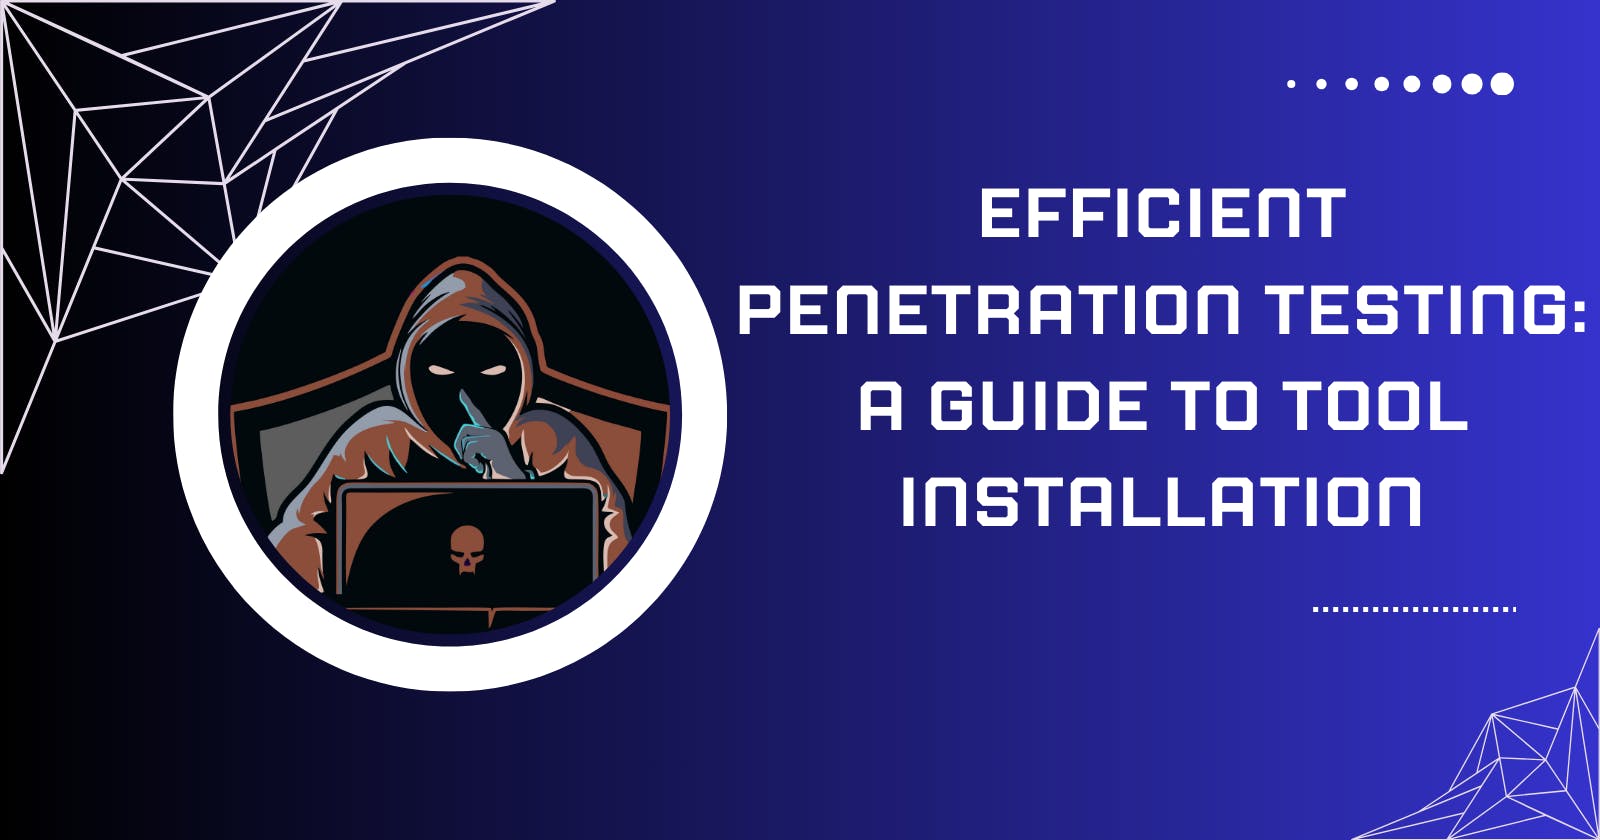 Efficient Penetration Testing: A Guide to Tool Installation